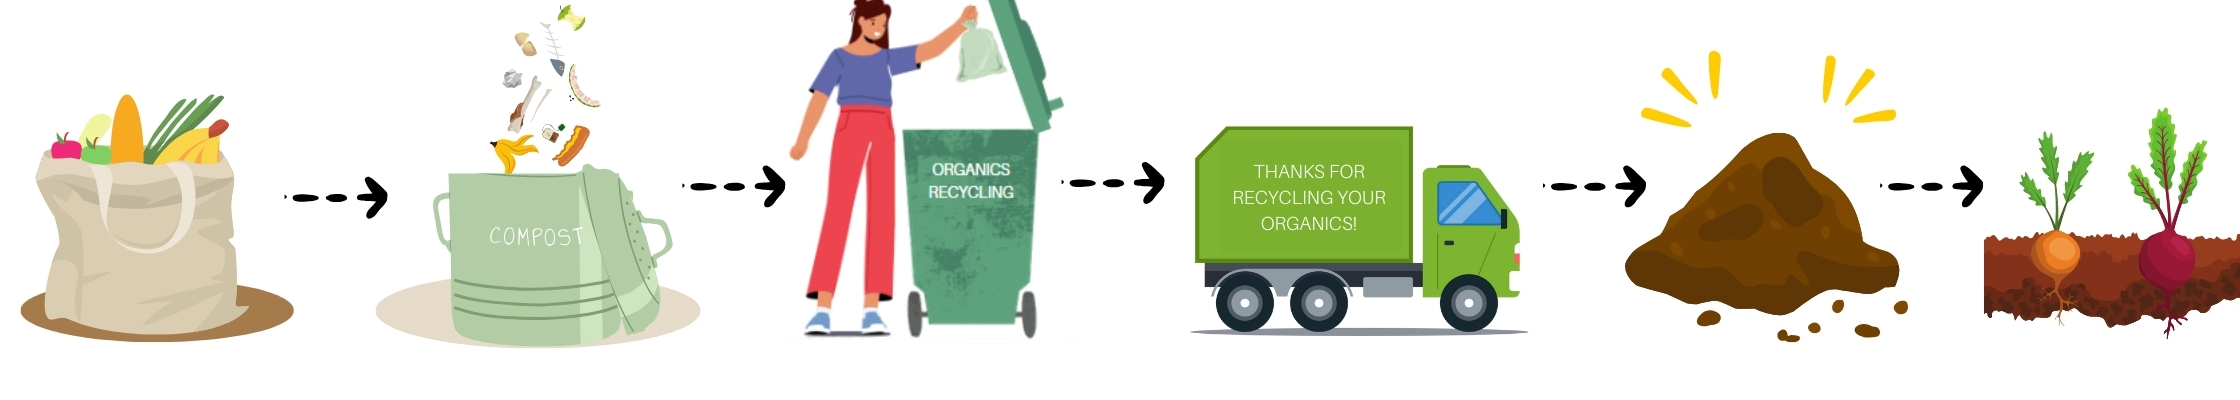 woman placing a green bag in the organics recycling cart, and a green organics recycling truck with "Thanks for recycling your organics!" on the side.